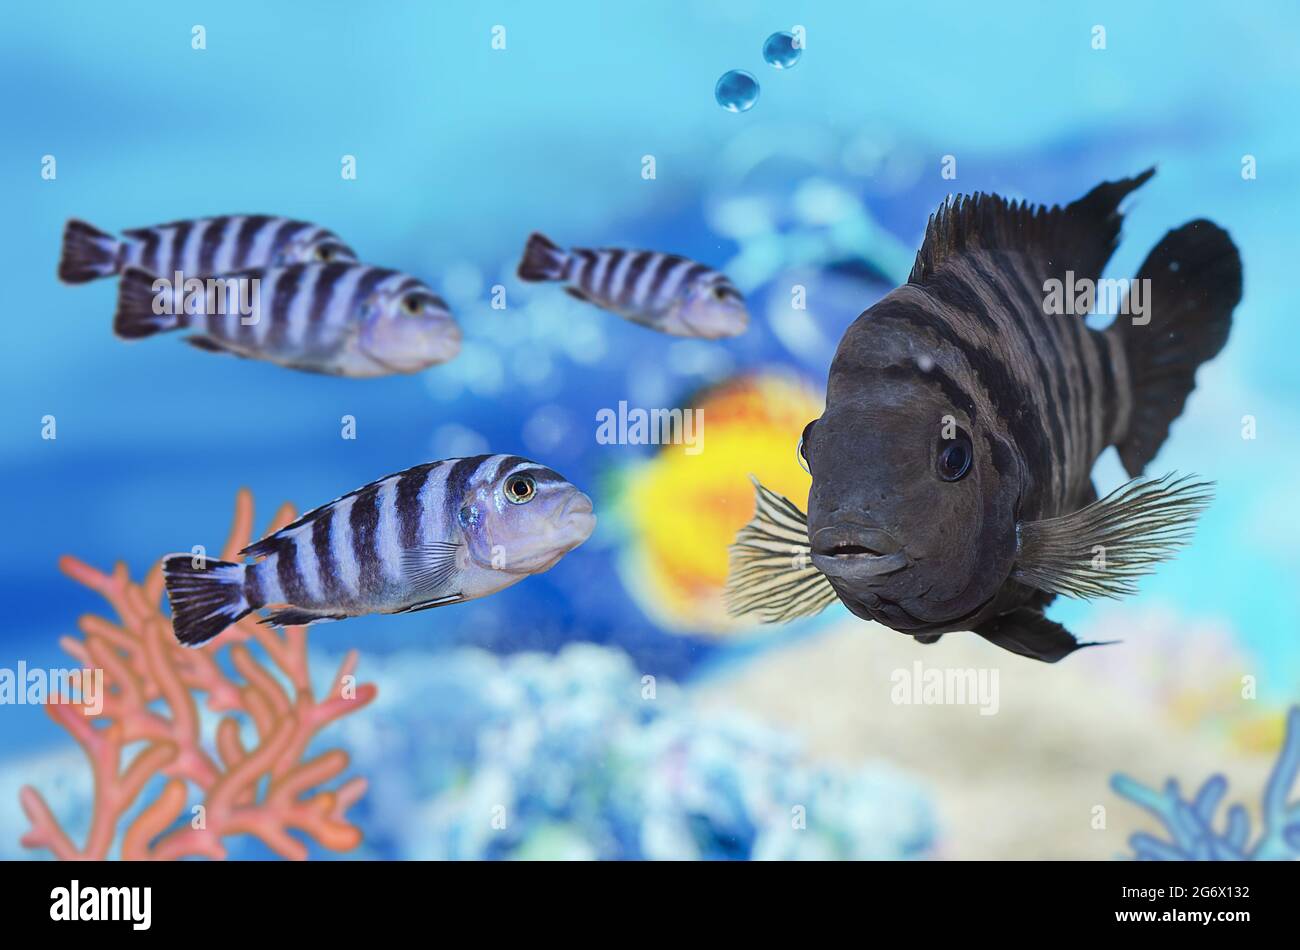 Fish with black stripes under water Cichlasoma nigrofasciatum on a defocused background of small striped fish. Selective focus Stock Photo